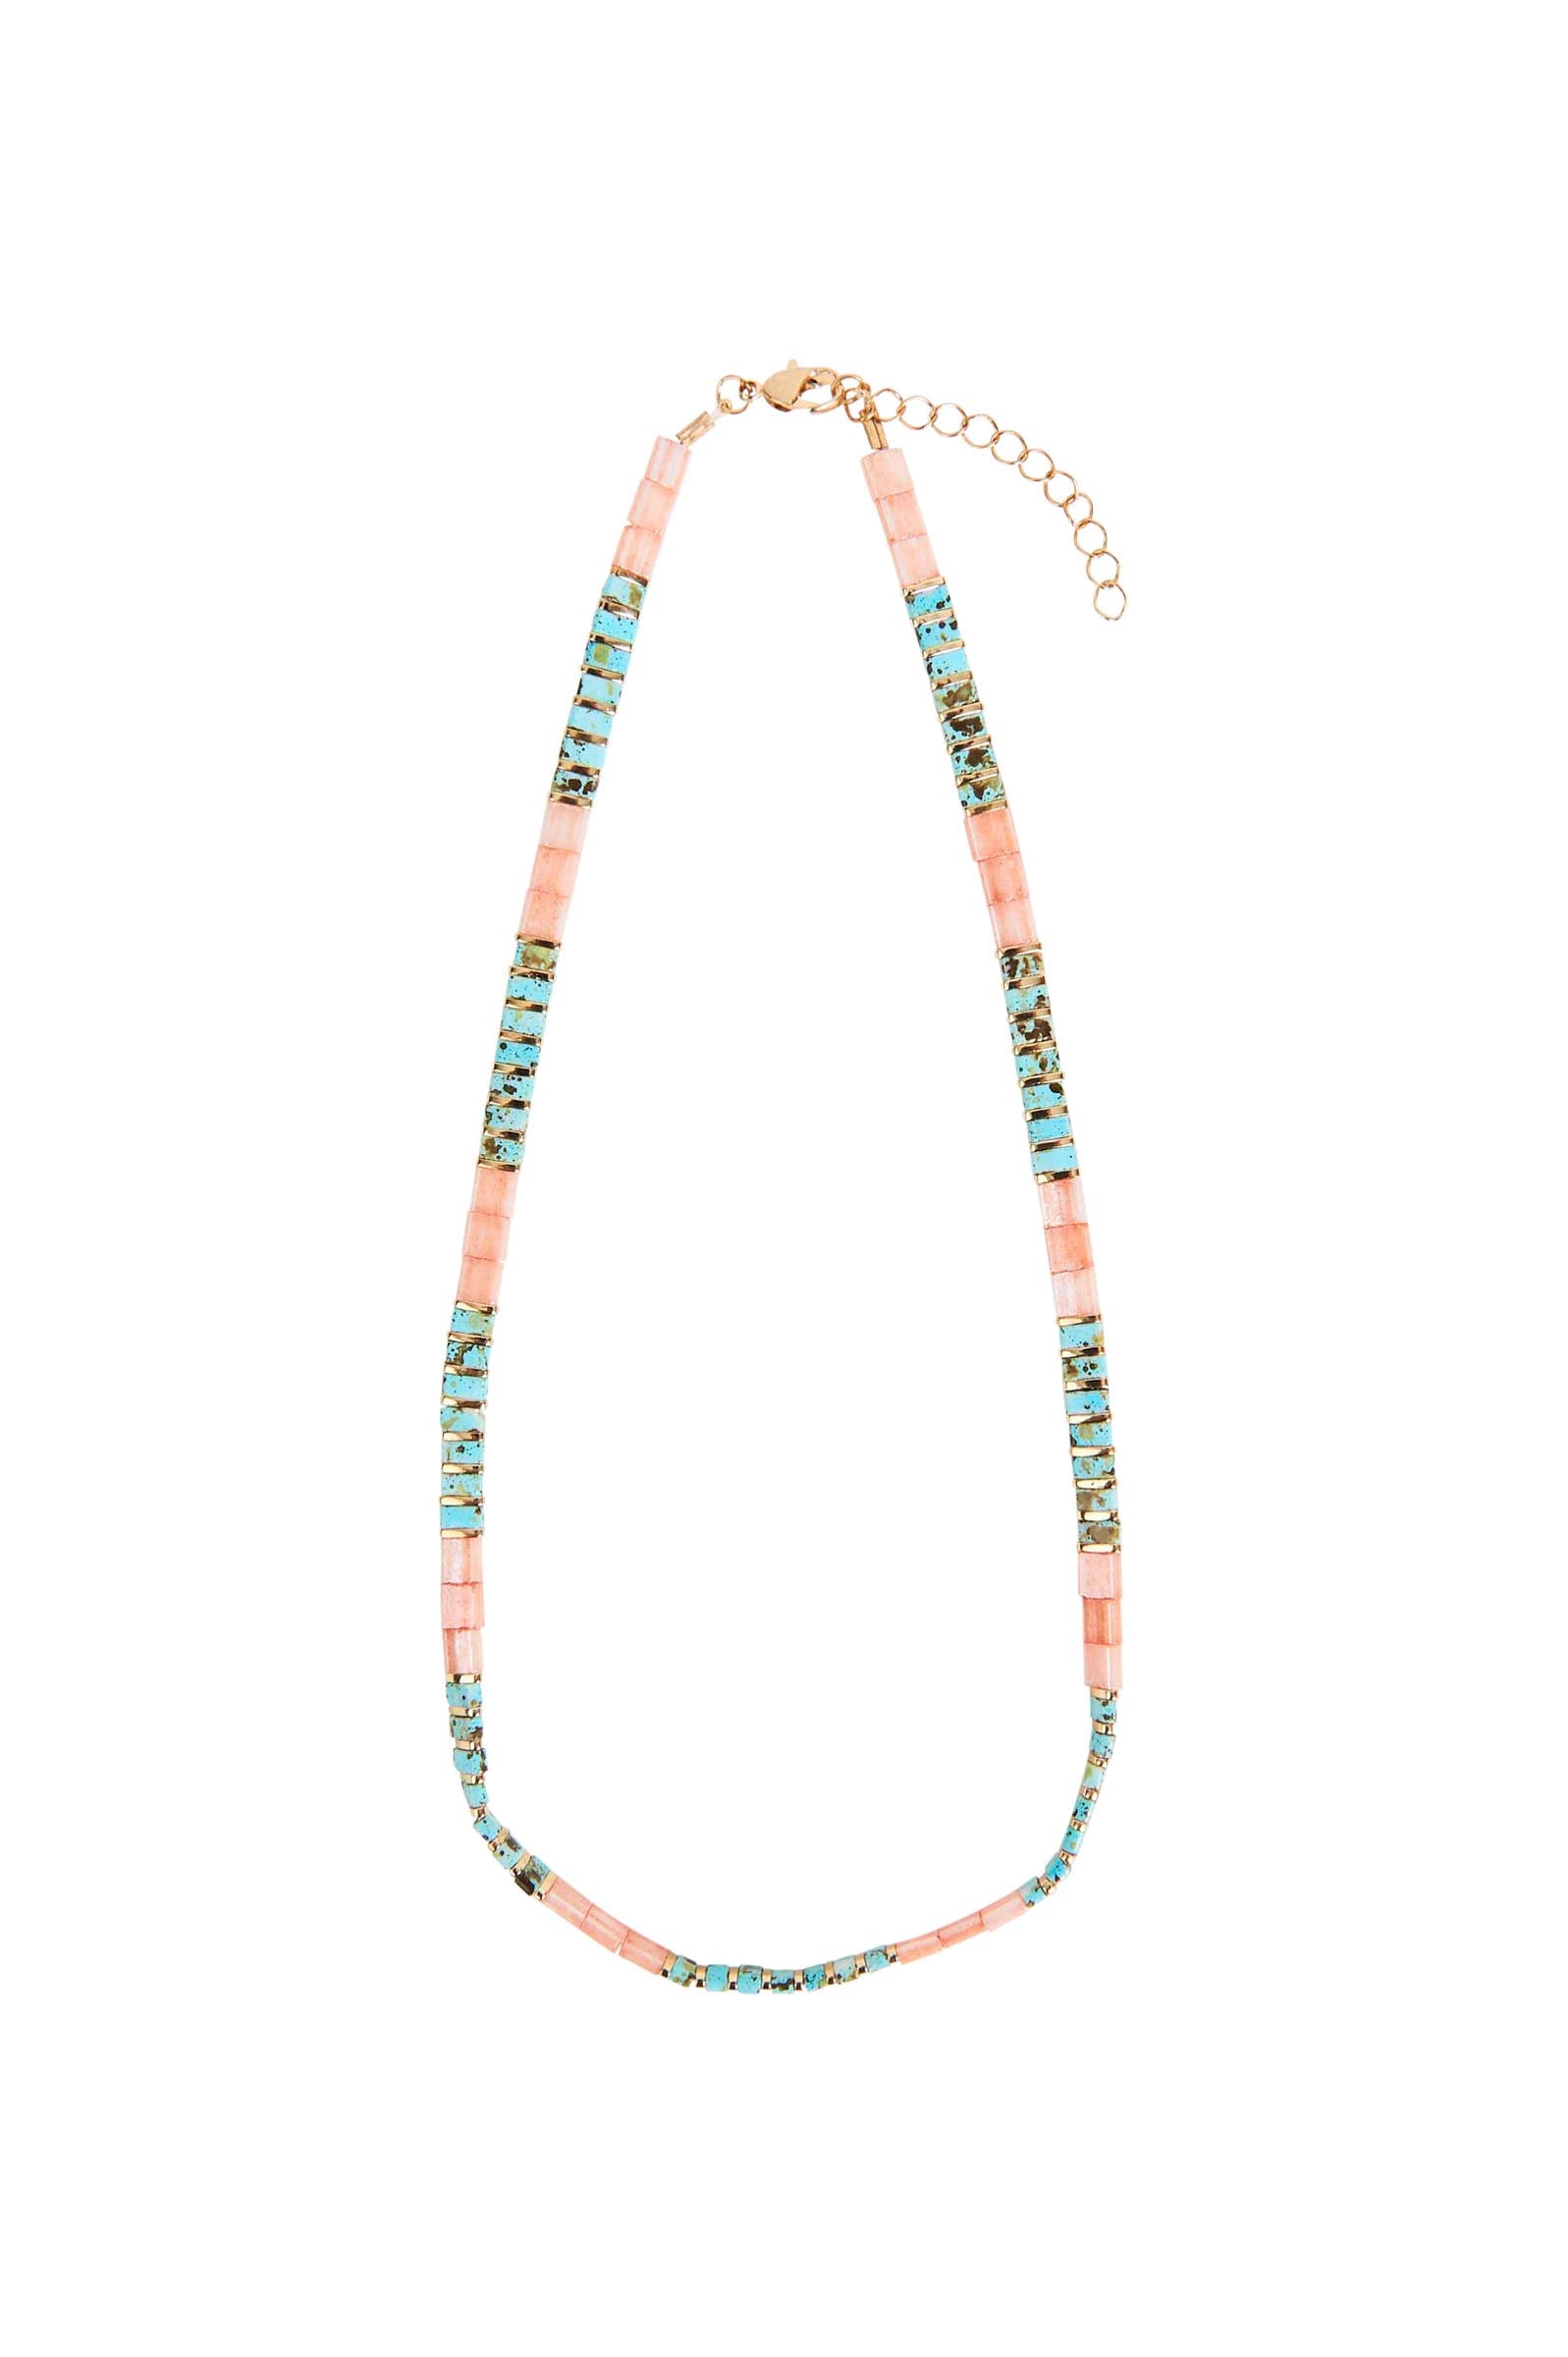 Aura Necklace - Be you - eb&ive Necklace